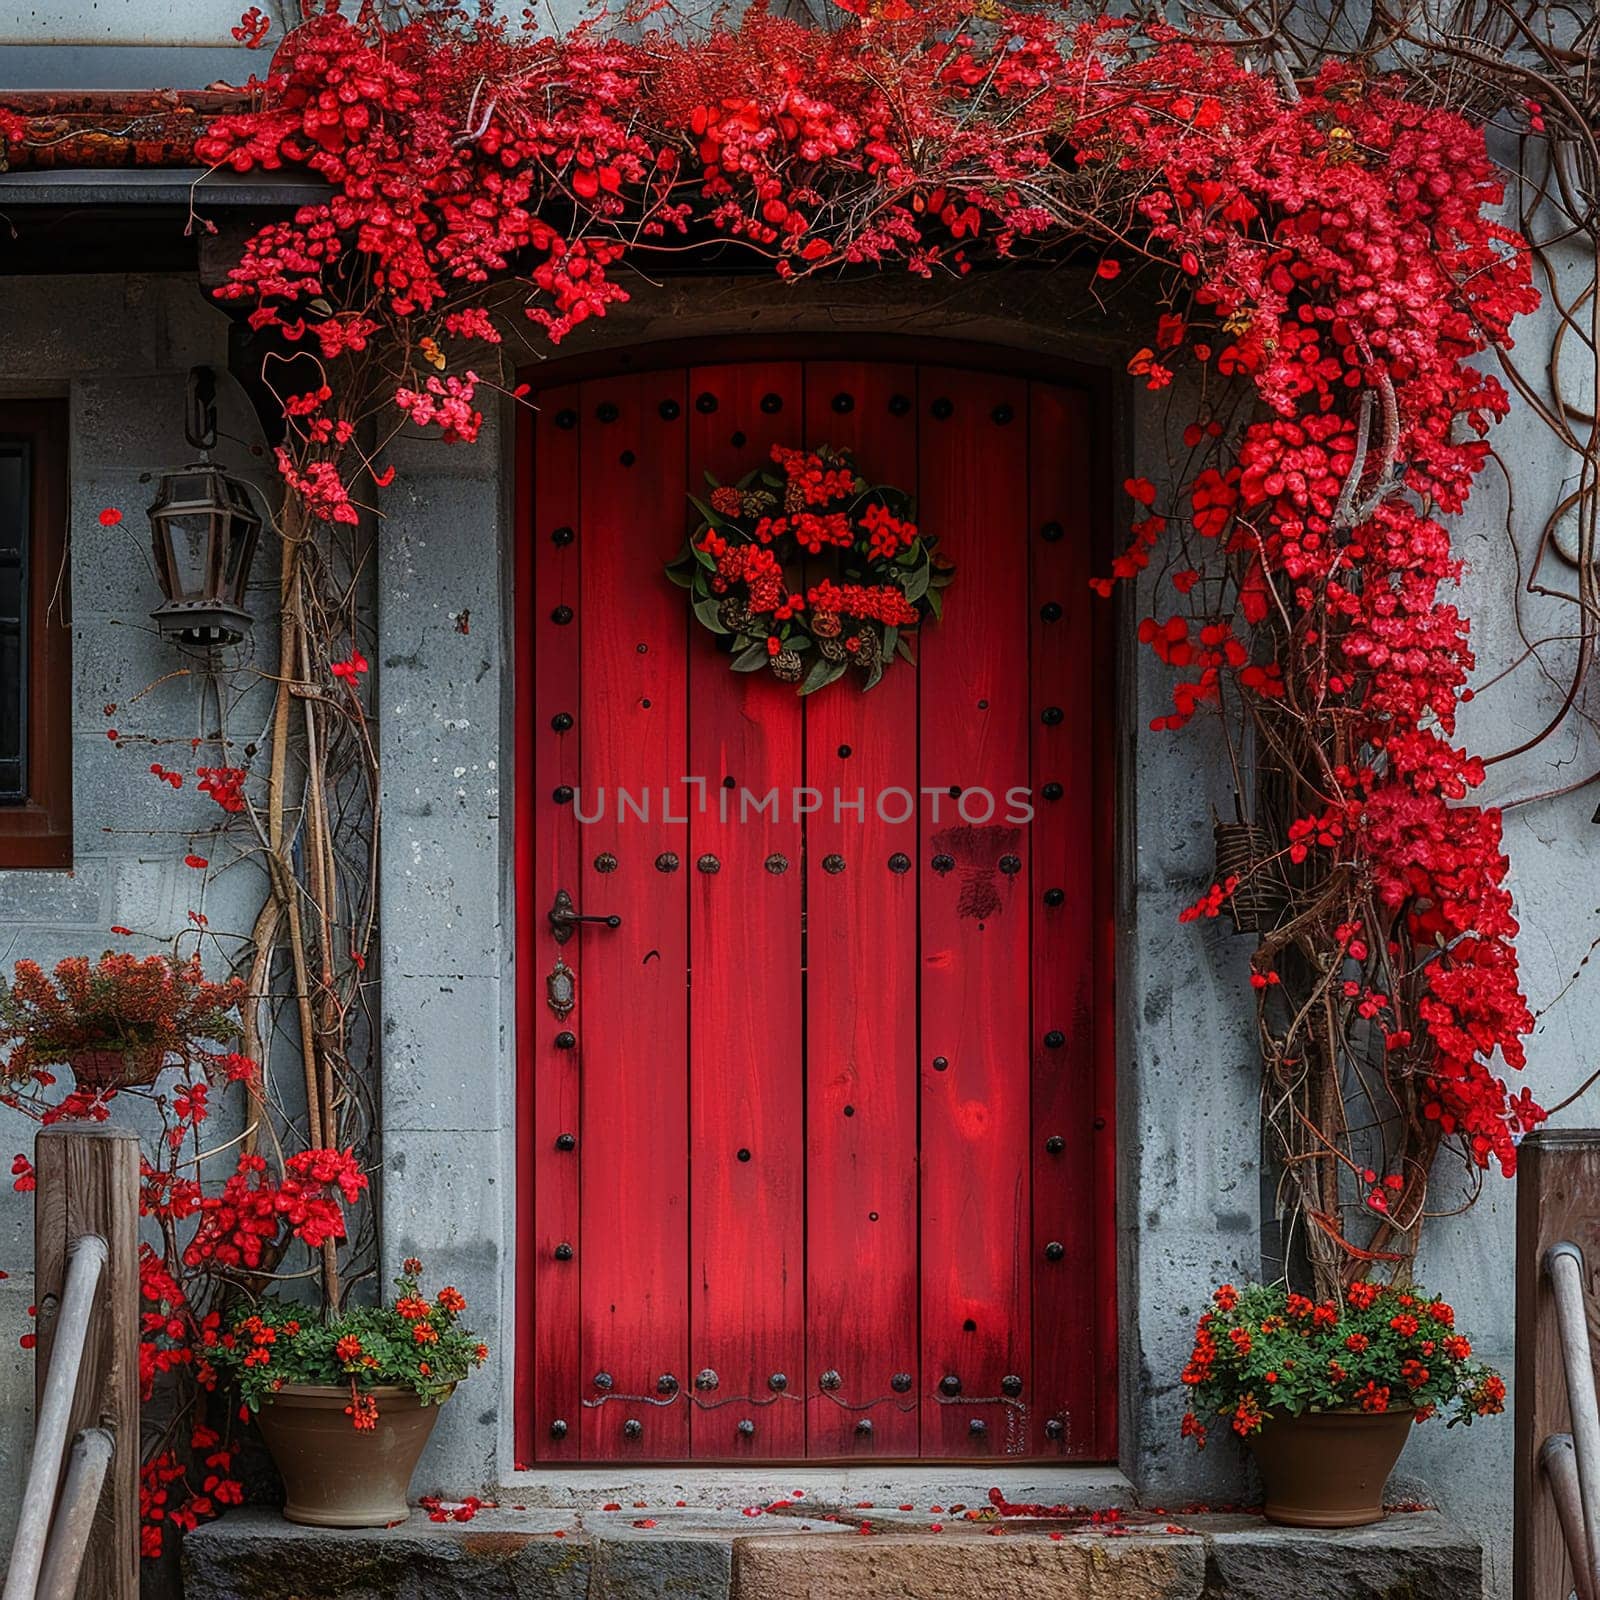 Door adorned with bright red Martisor, symbolizing first day of spring.